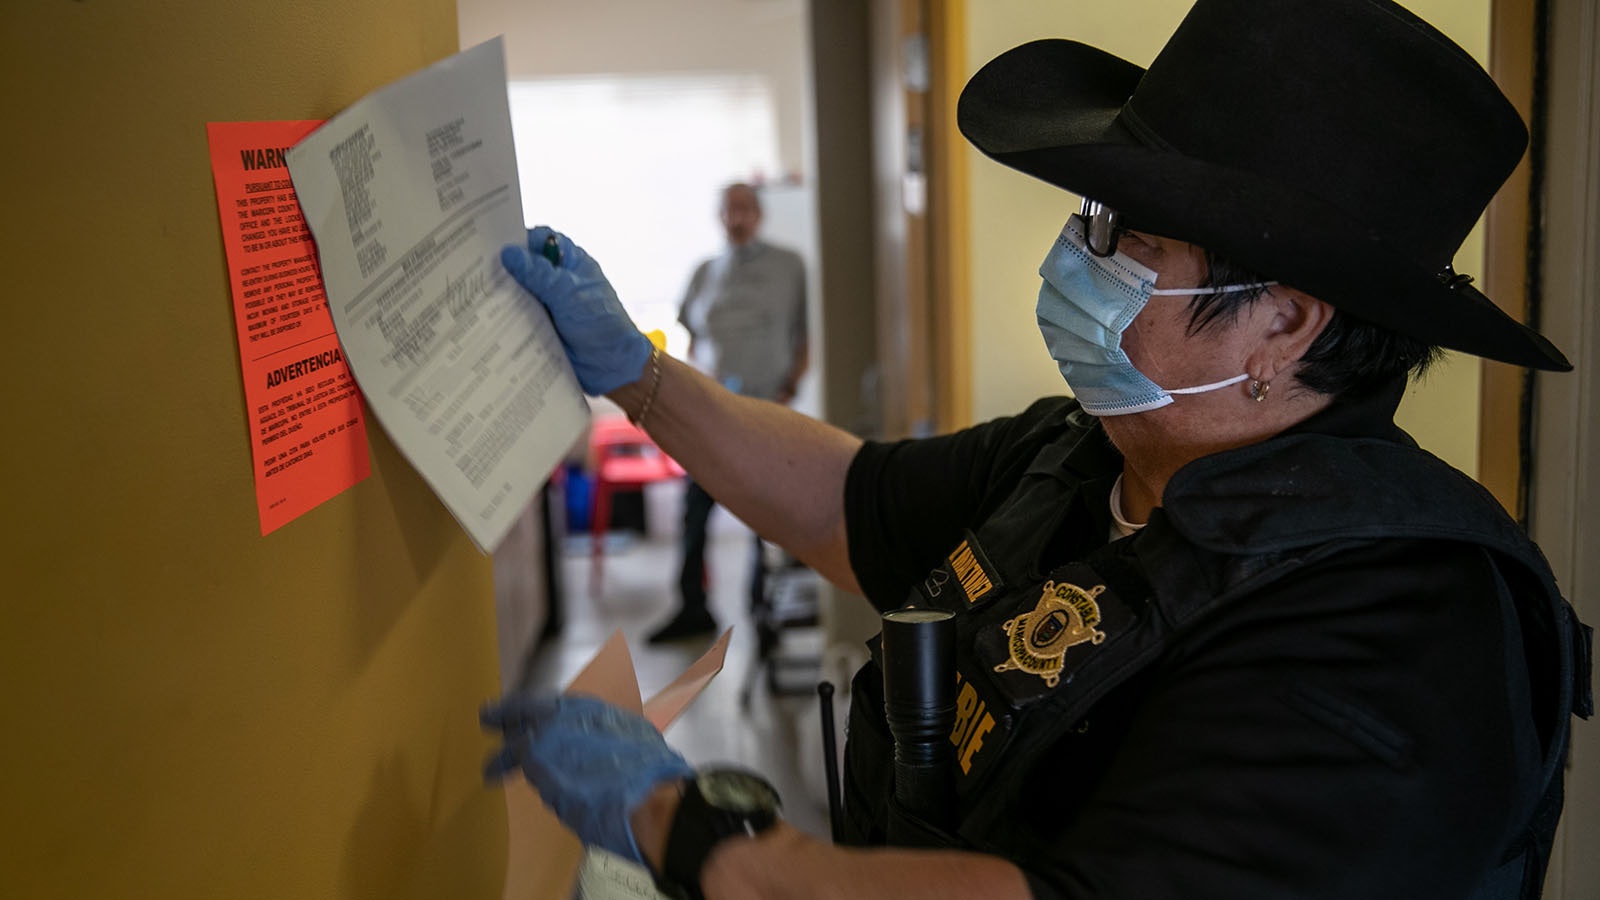 File photo: Officer posts eviction notice